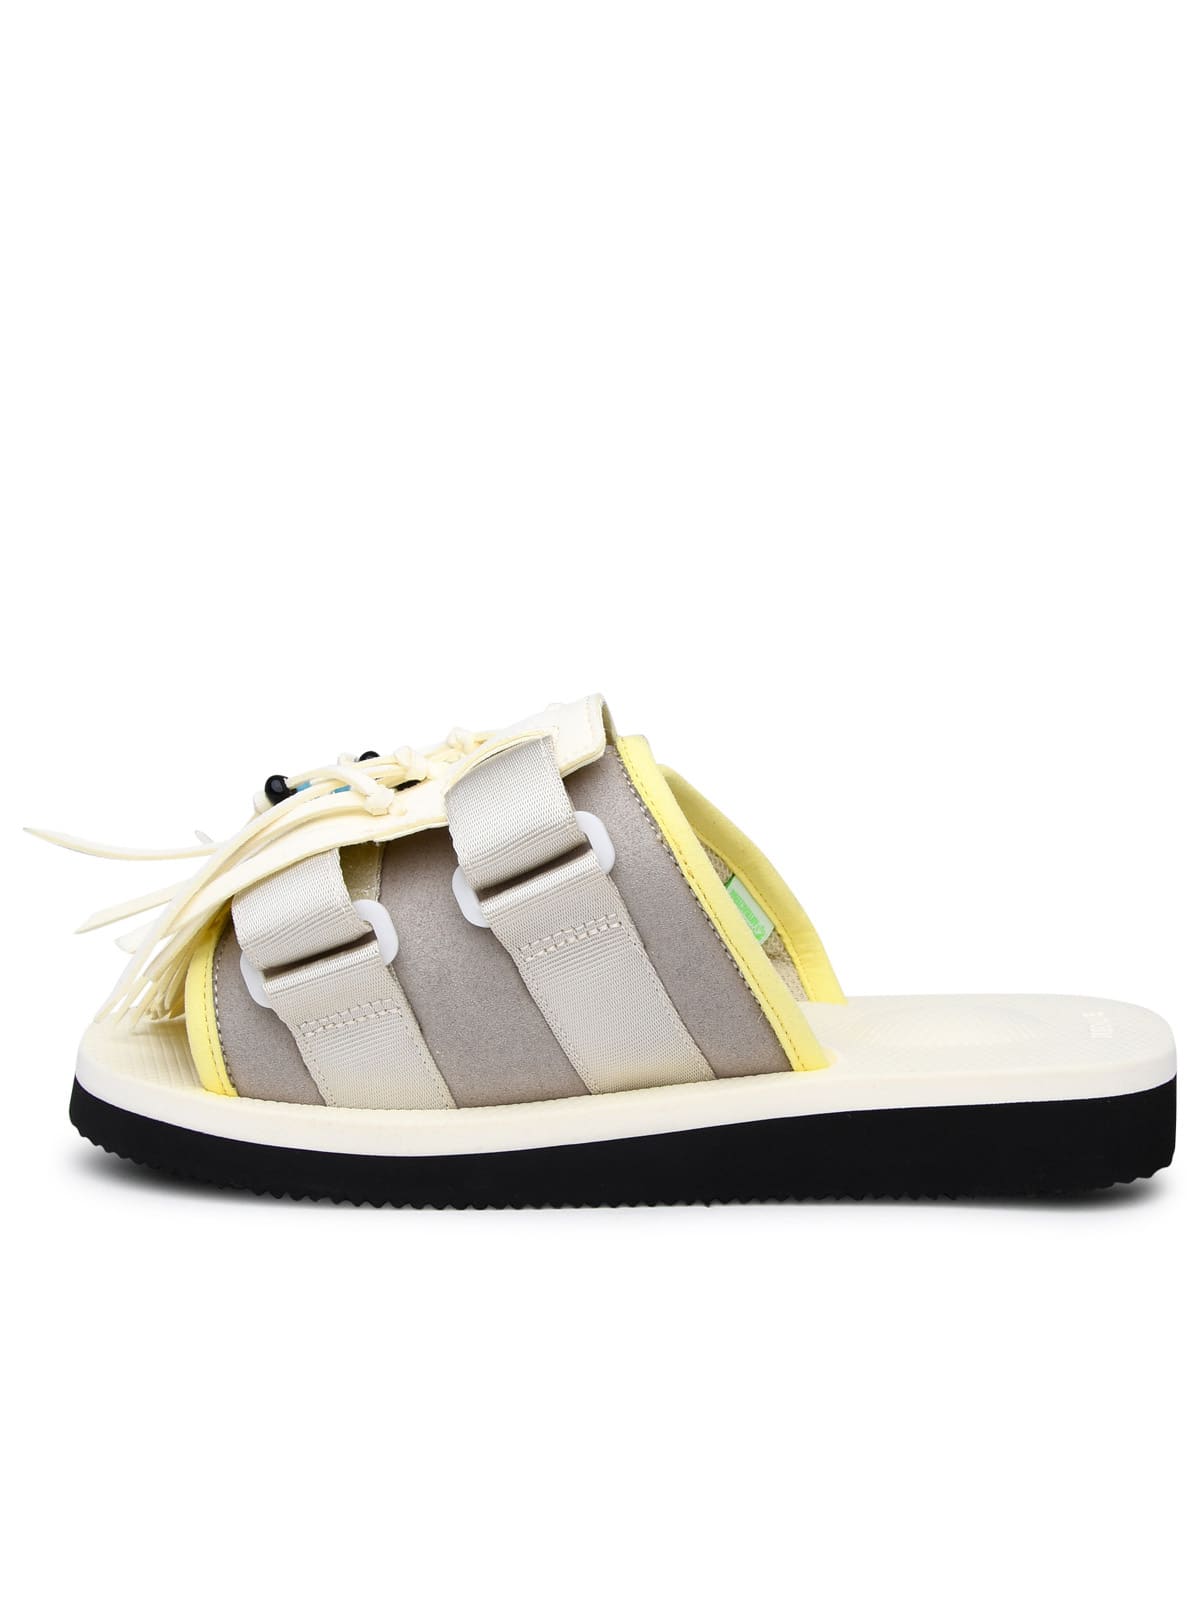 Shop Suicoke Hoto Cab Slipper In Ivory Synthetic Leather In White